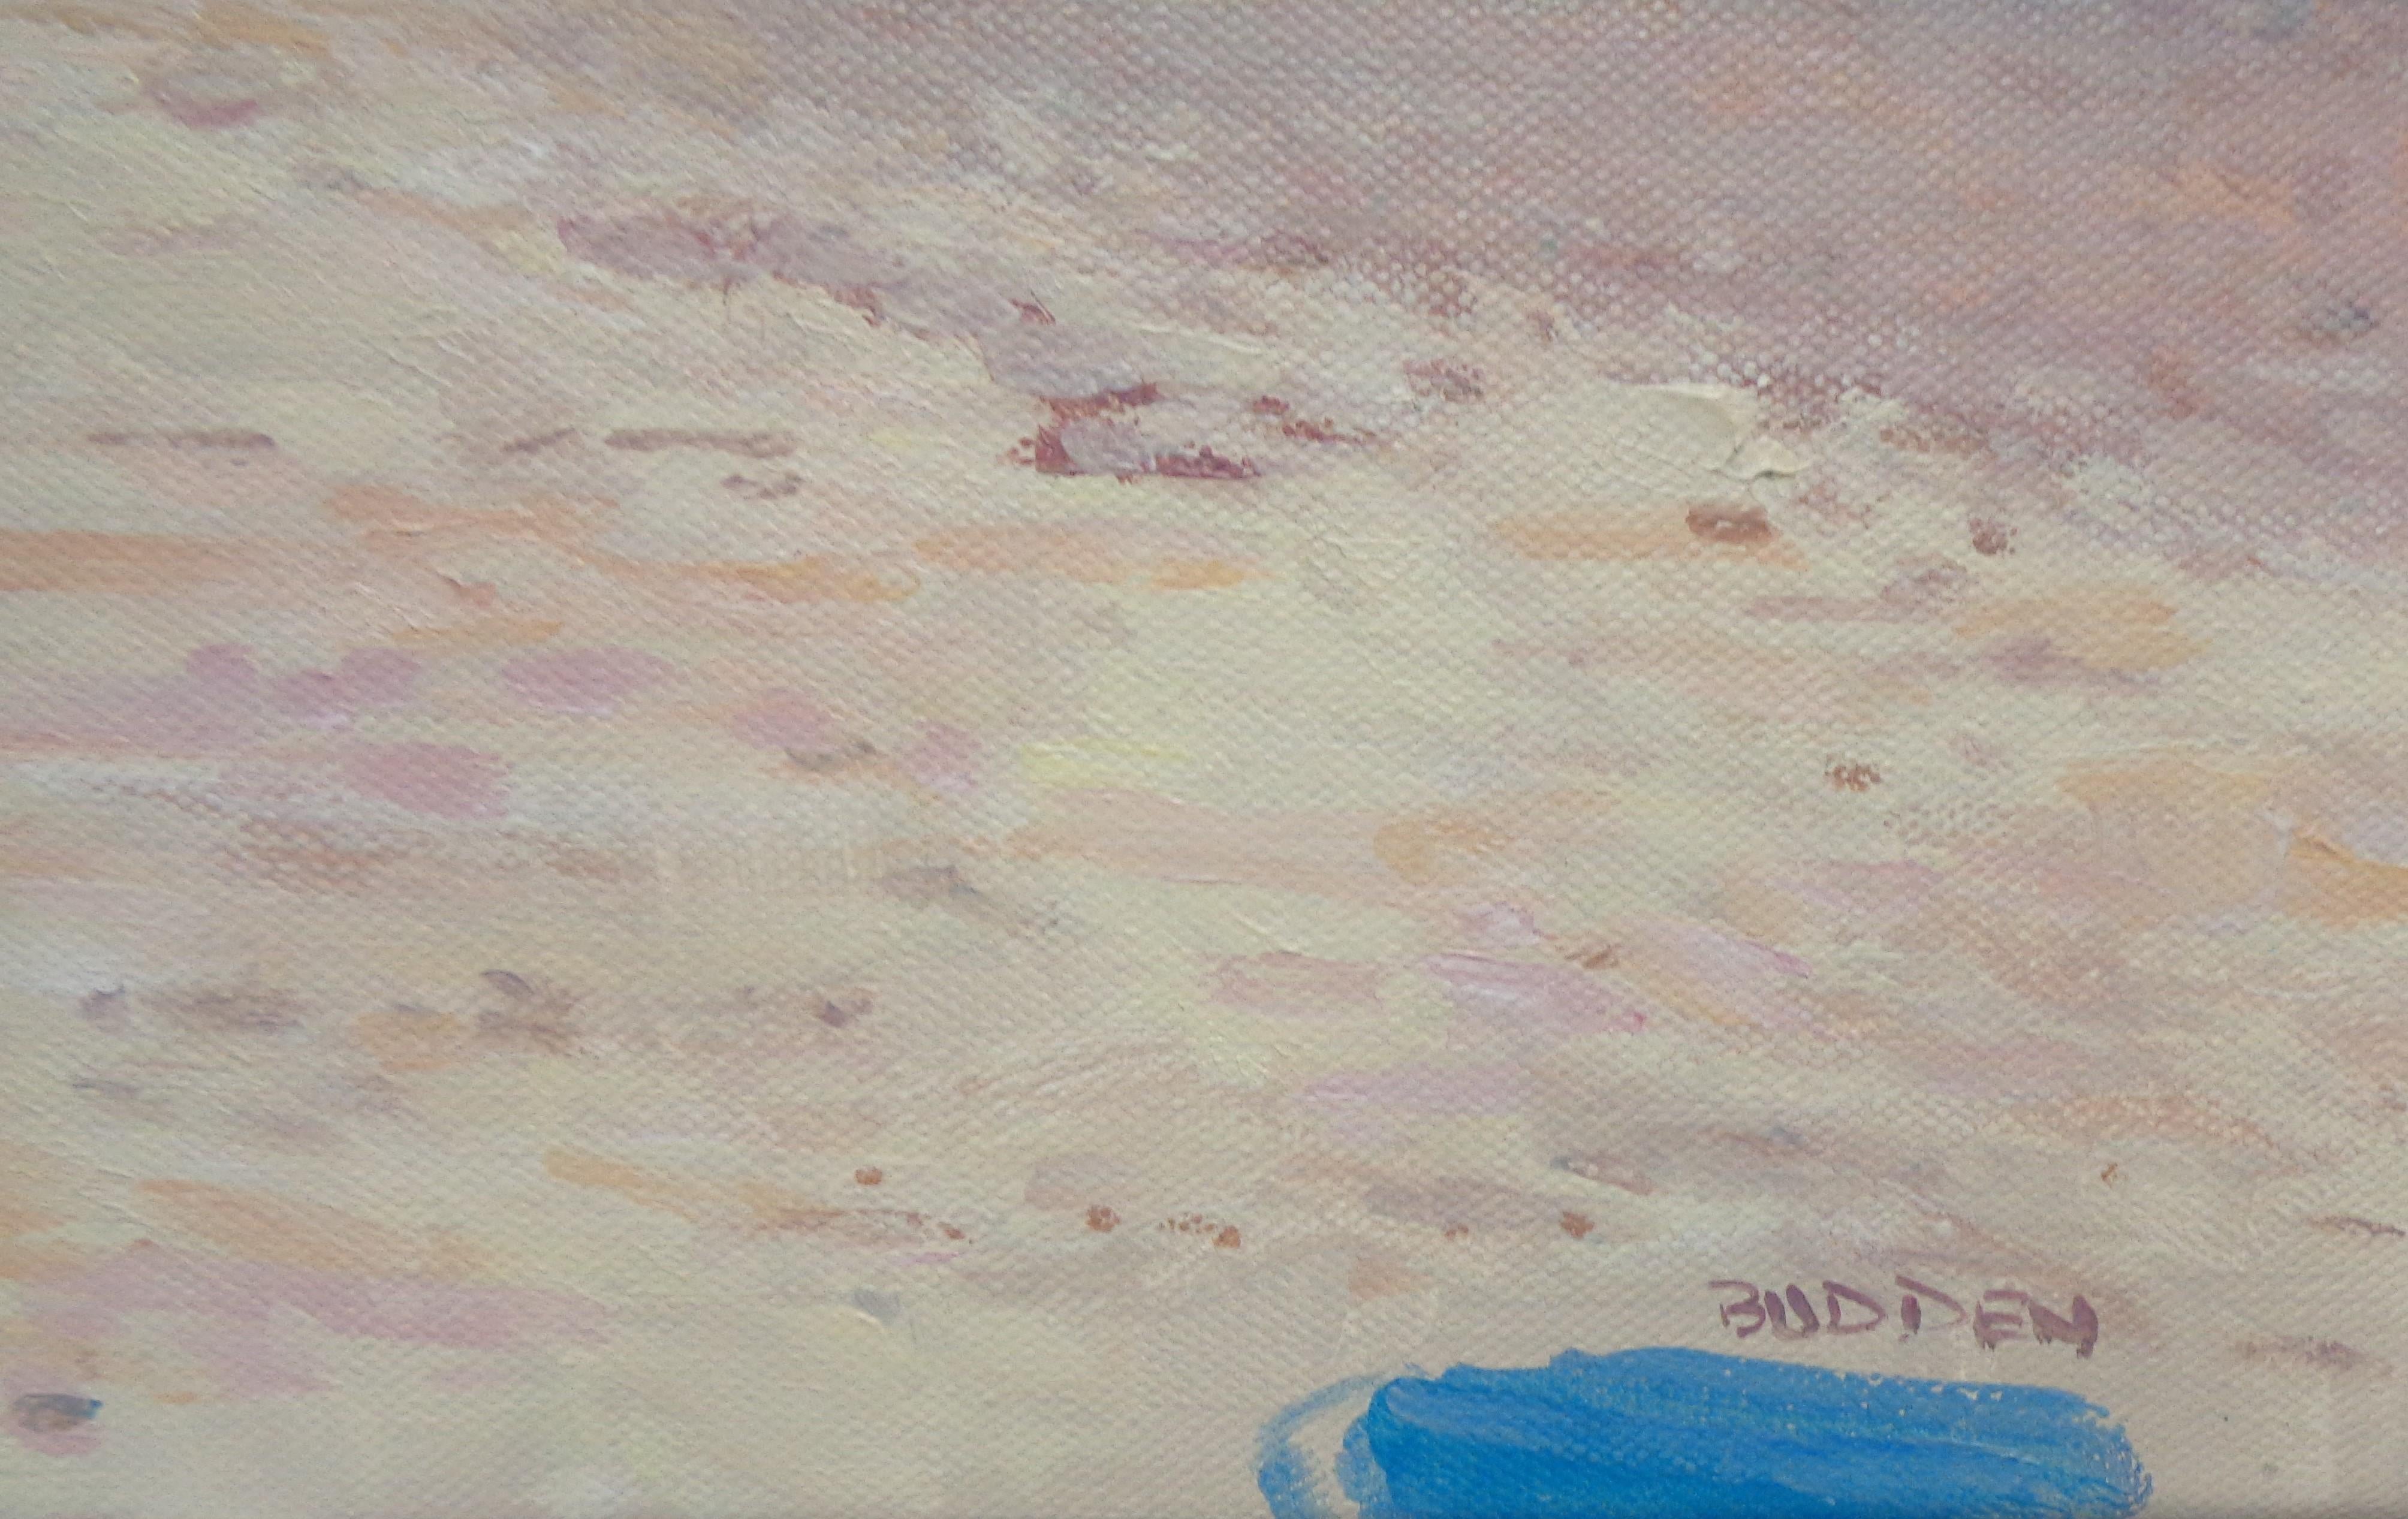 Beach Ocean Impressionistic Seascape Oil Painting Michael Budden Beach Day For Sale 4